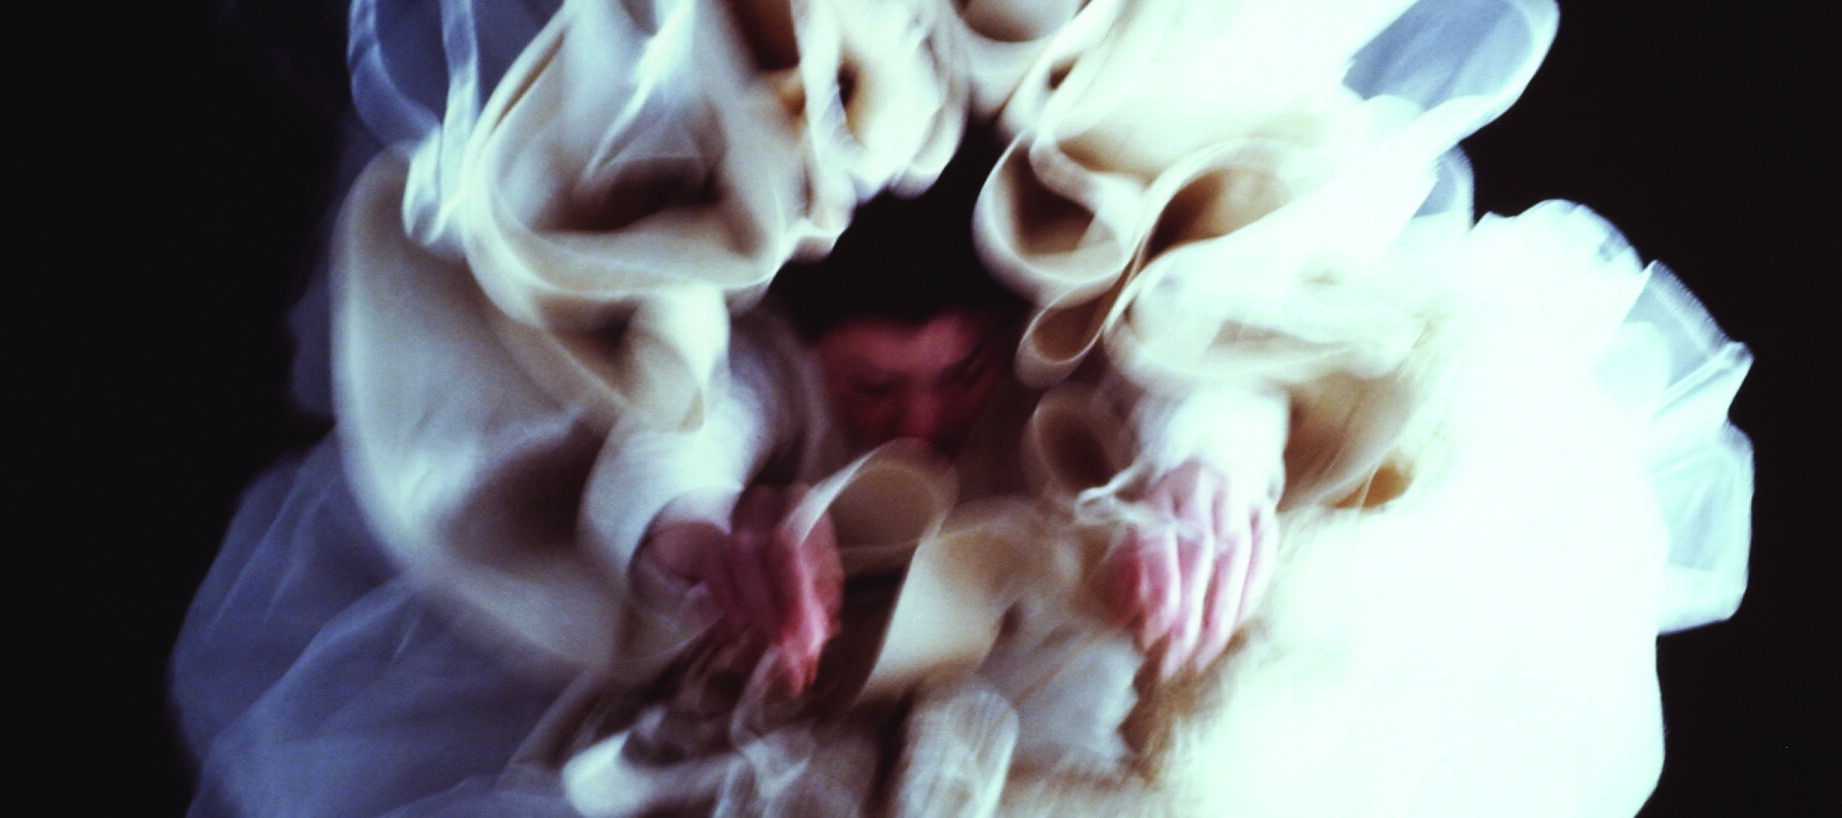 Large, glossy, blurry, color photograph of a light-skinned woman hanging upside-down directly above the viewer.  Her arms hang loosely above her head, enveloped in diaphanous white skirts billowing around her, set against a black background, creating a flower-like appearance.